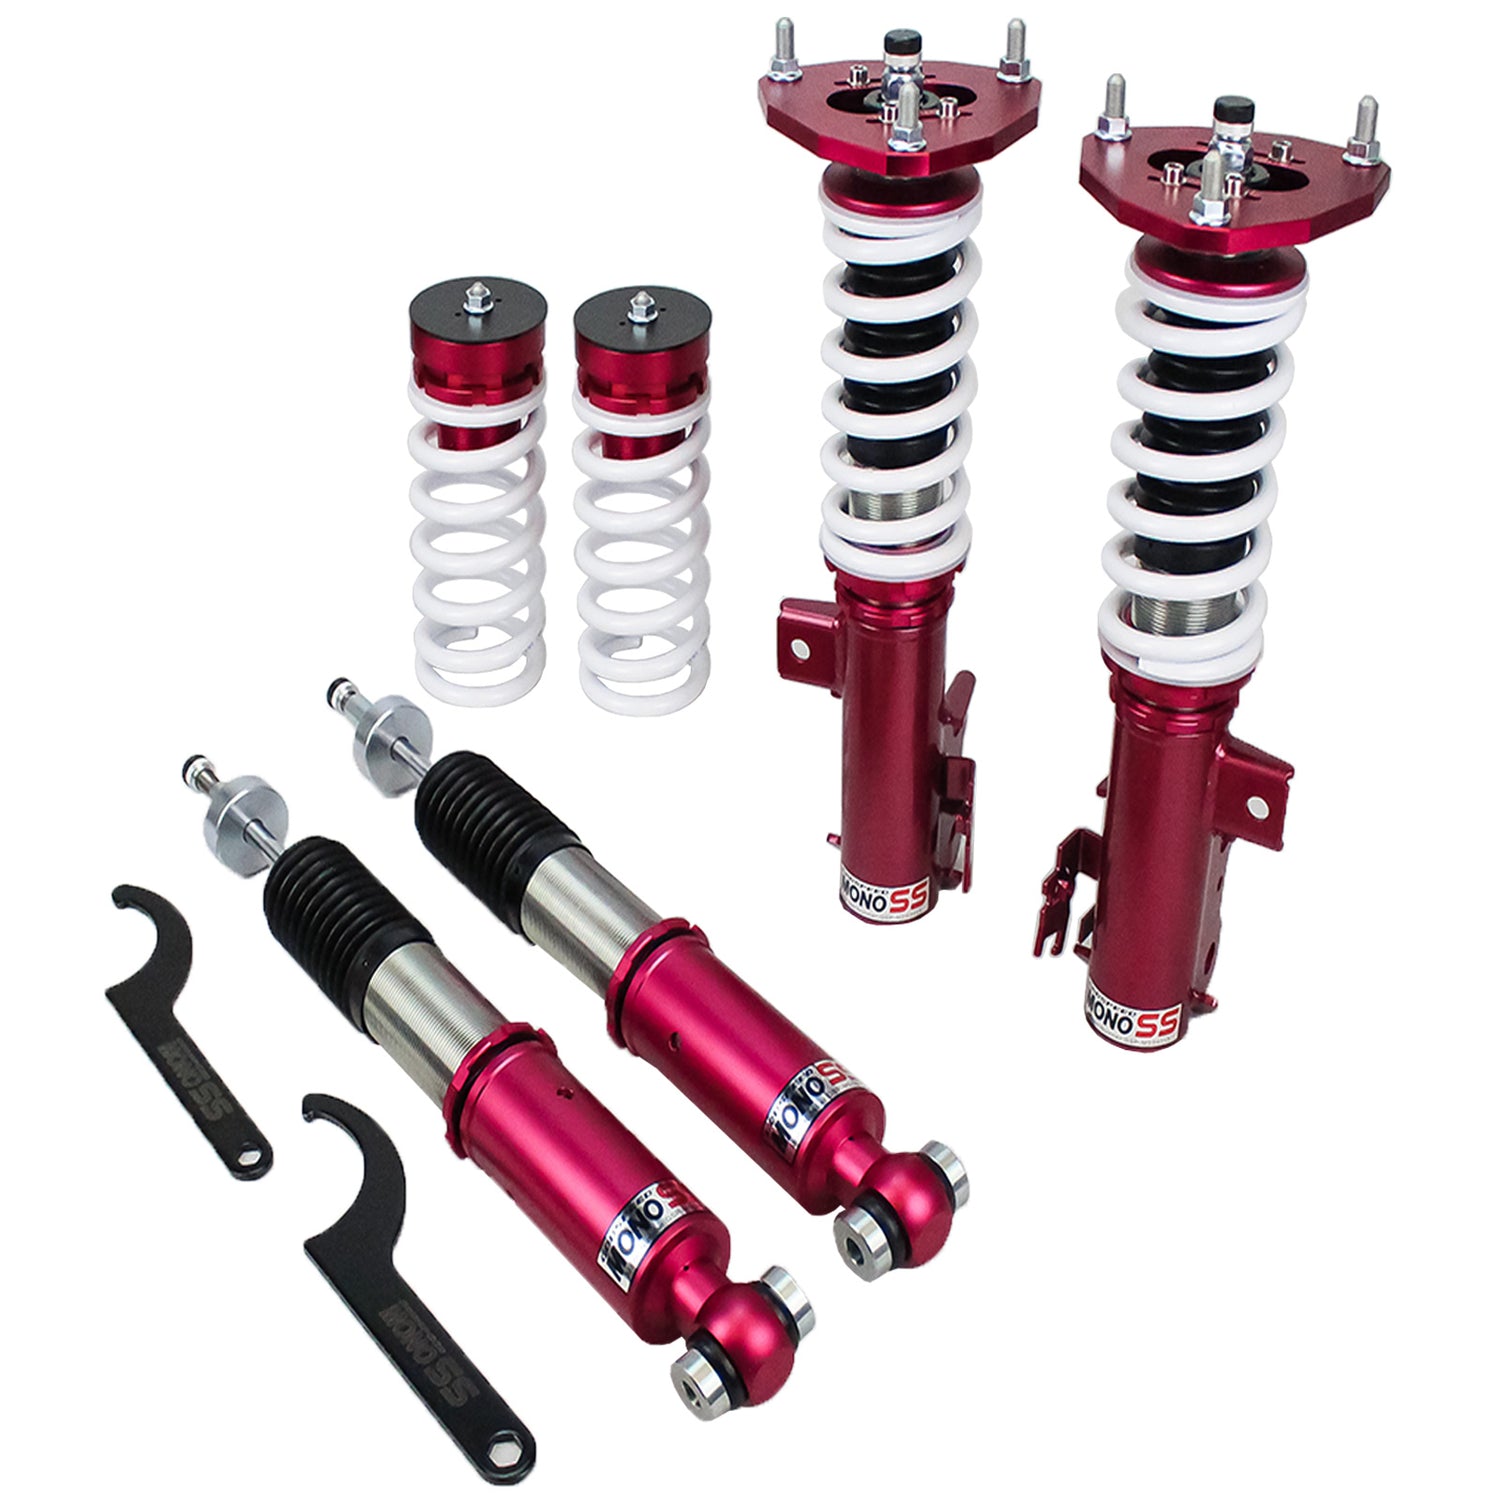 Godspeed MSS0115 MonoSS Coilover Lowering Kit, Fully Adjustable, Ride Height, Spring Tension And 16 Click Damping, Toyota Prius(XW30) 2010-15